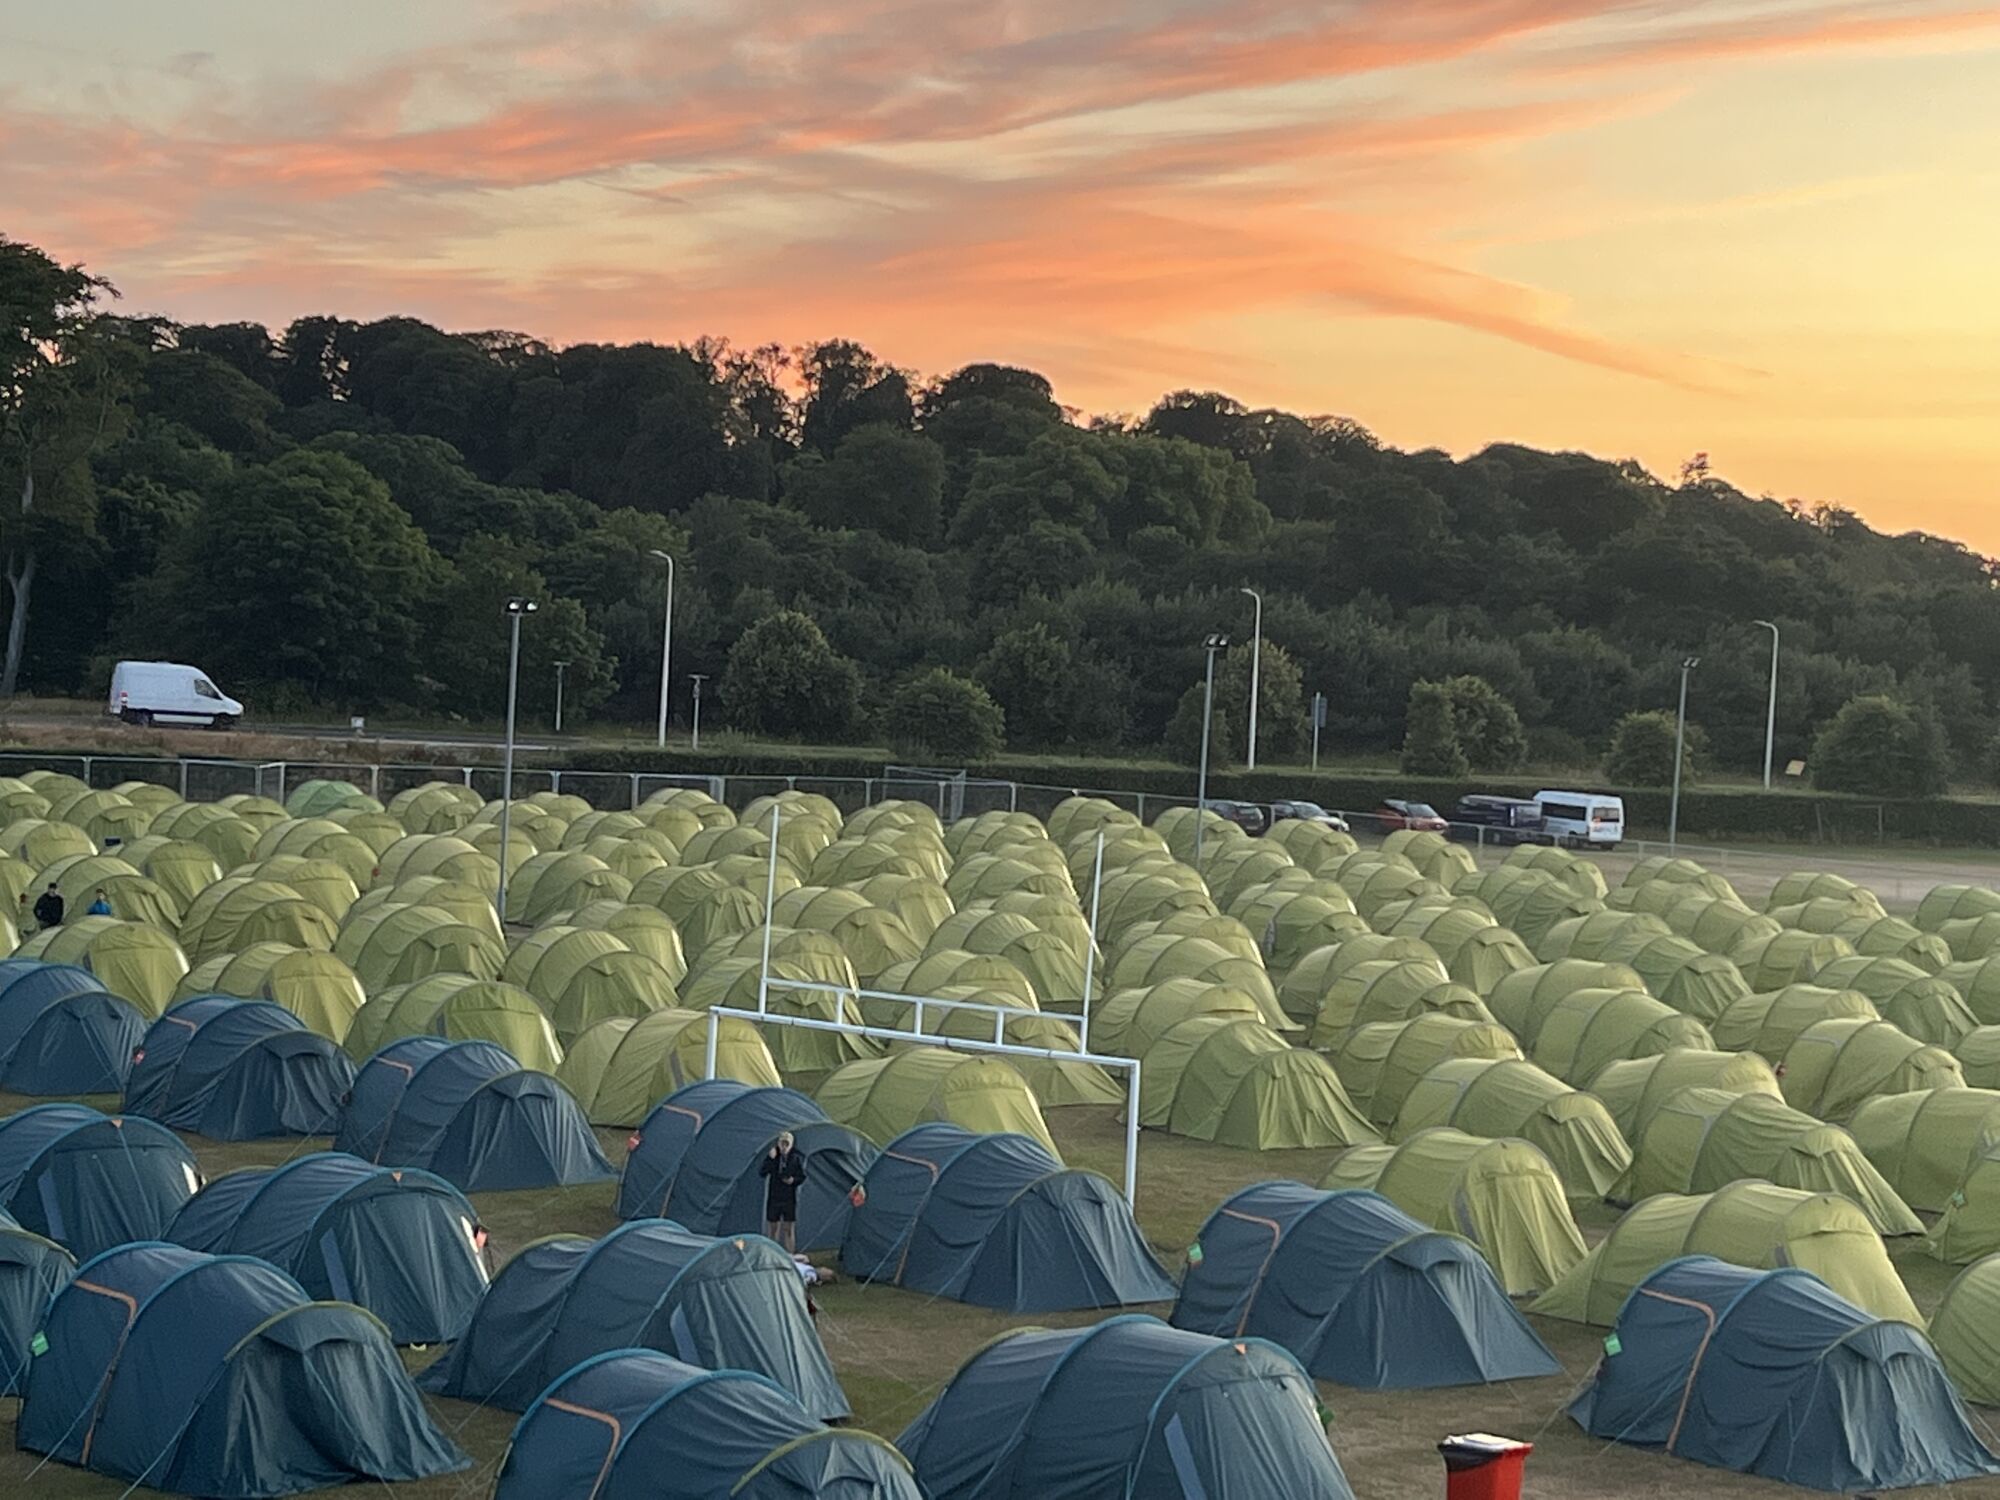 770 cozy nylon tents sit outside the 17th green at The Old Course at St. Andrews.